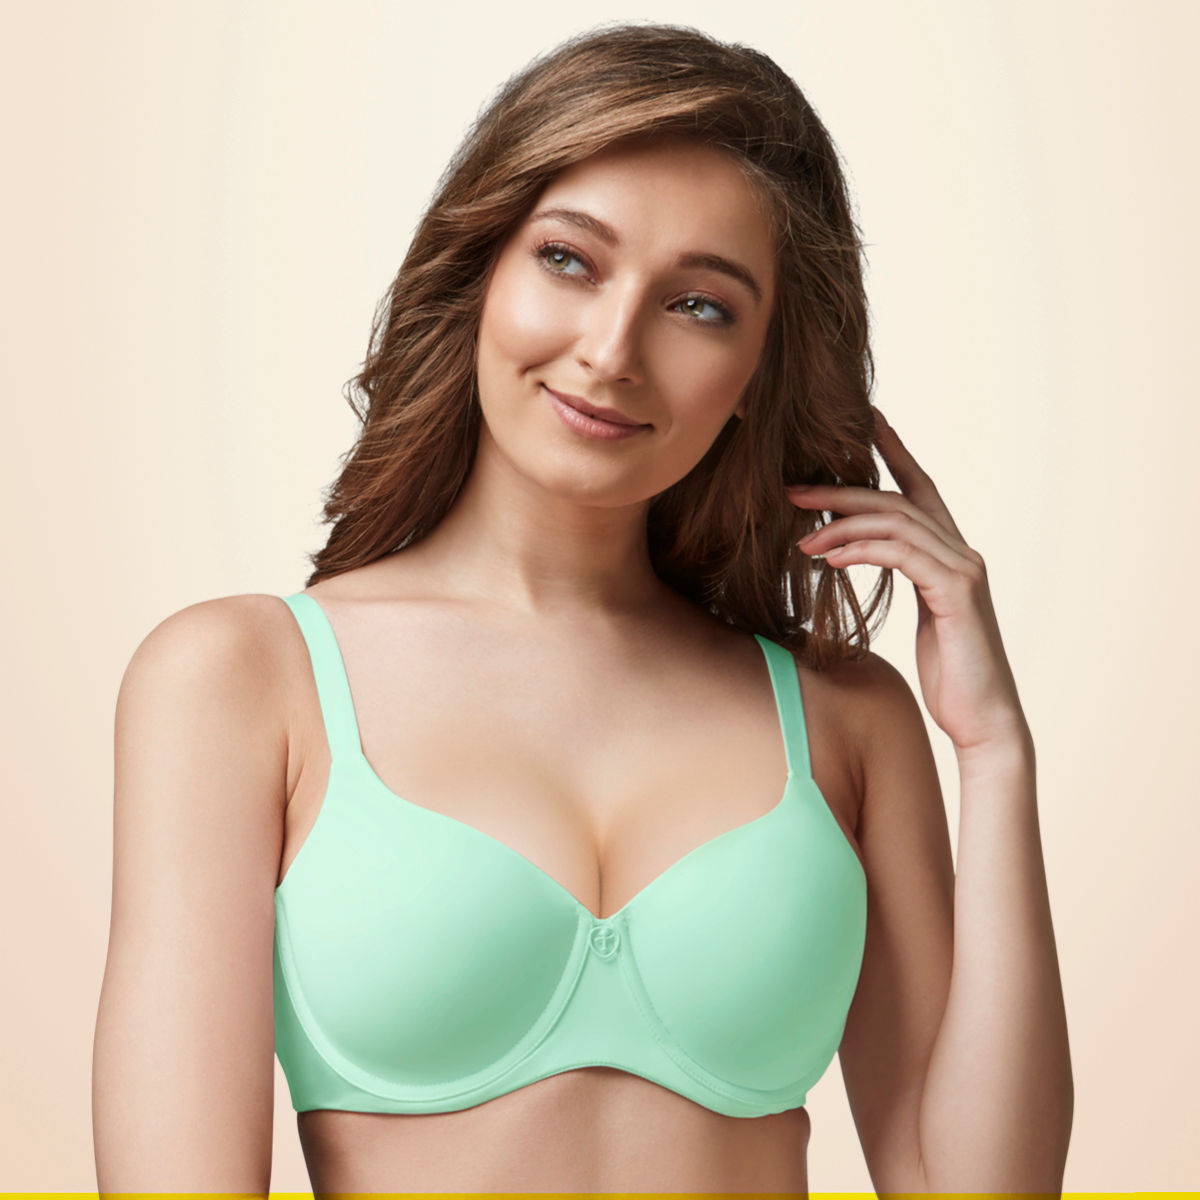 https://images-static.nykaa.com/media/catalog/product/a/f/afff827trylo-nykaa-delight-green_1.jpg